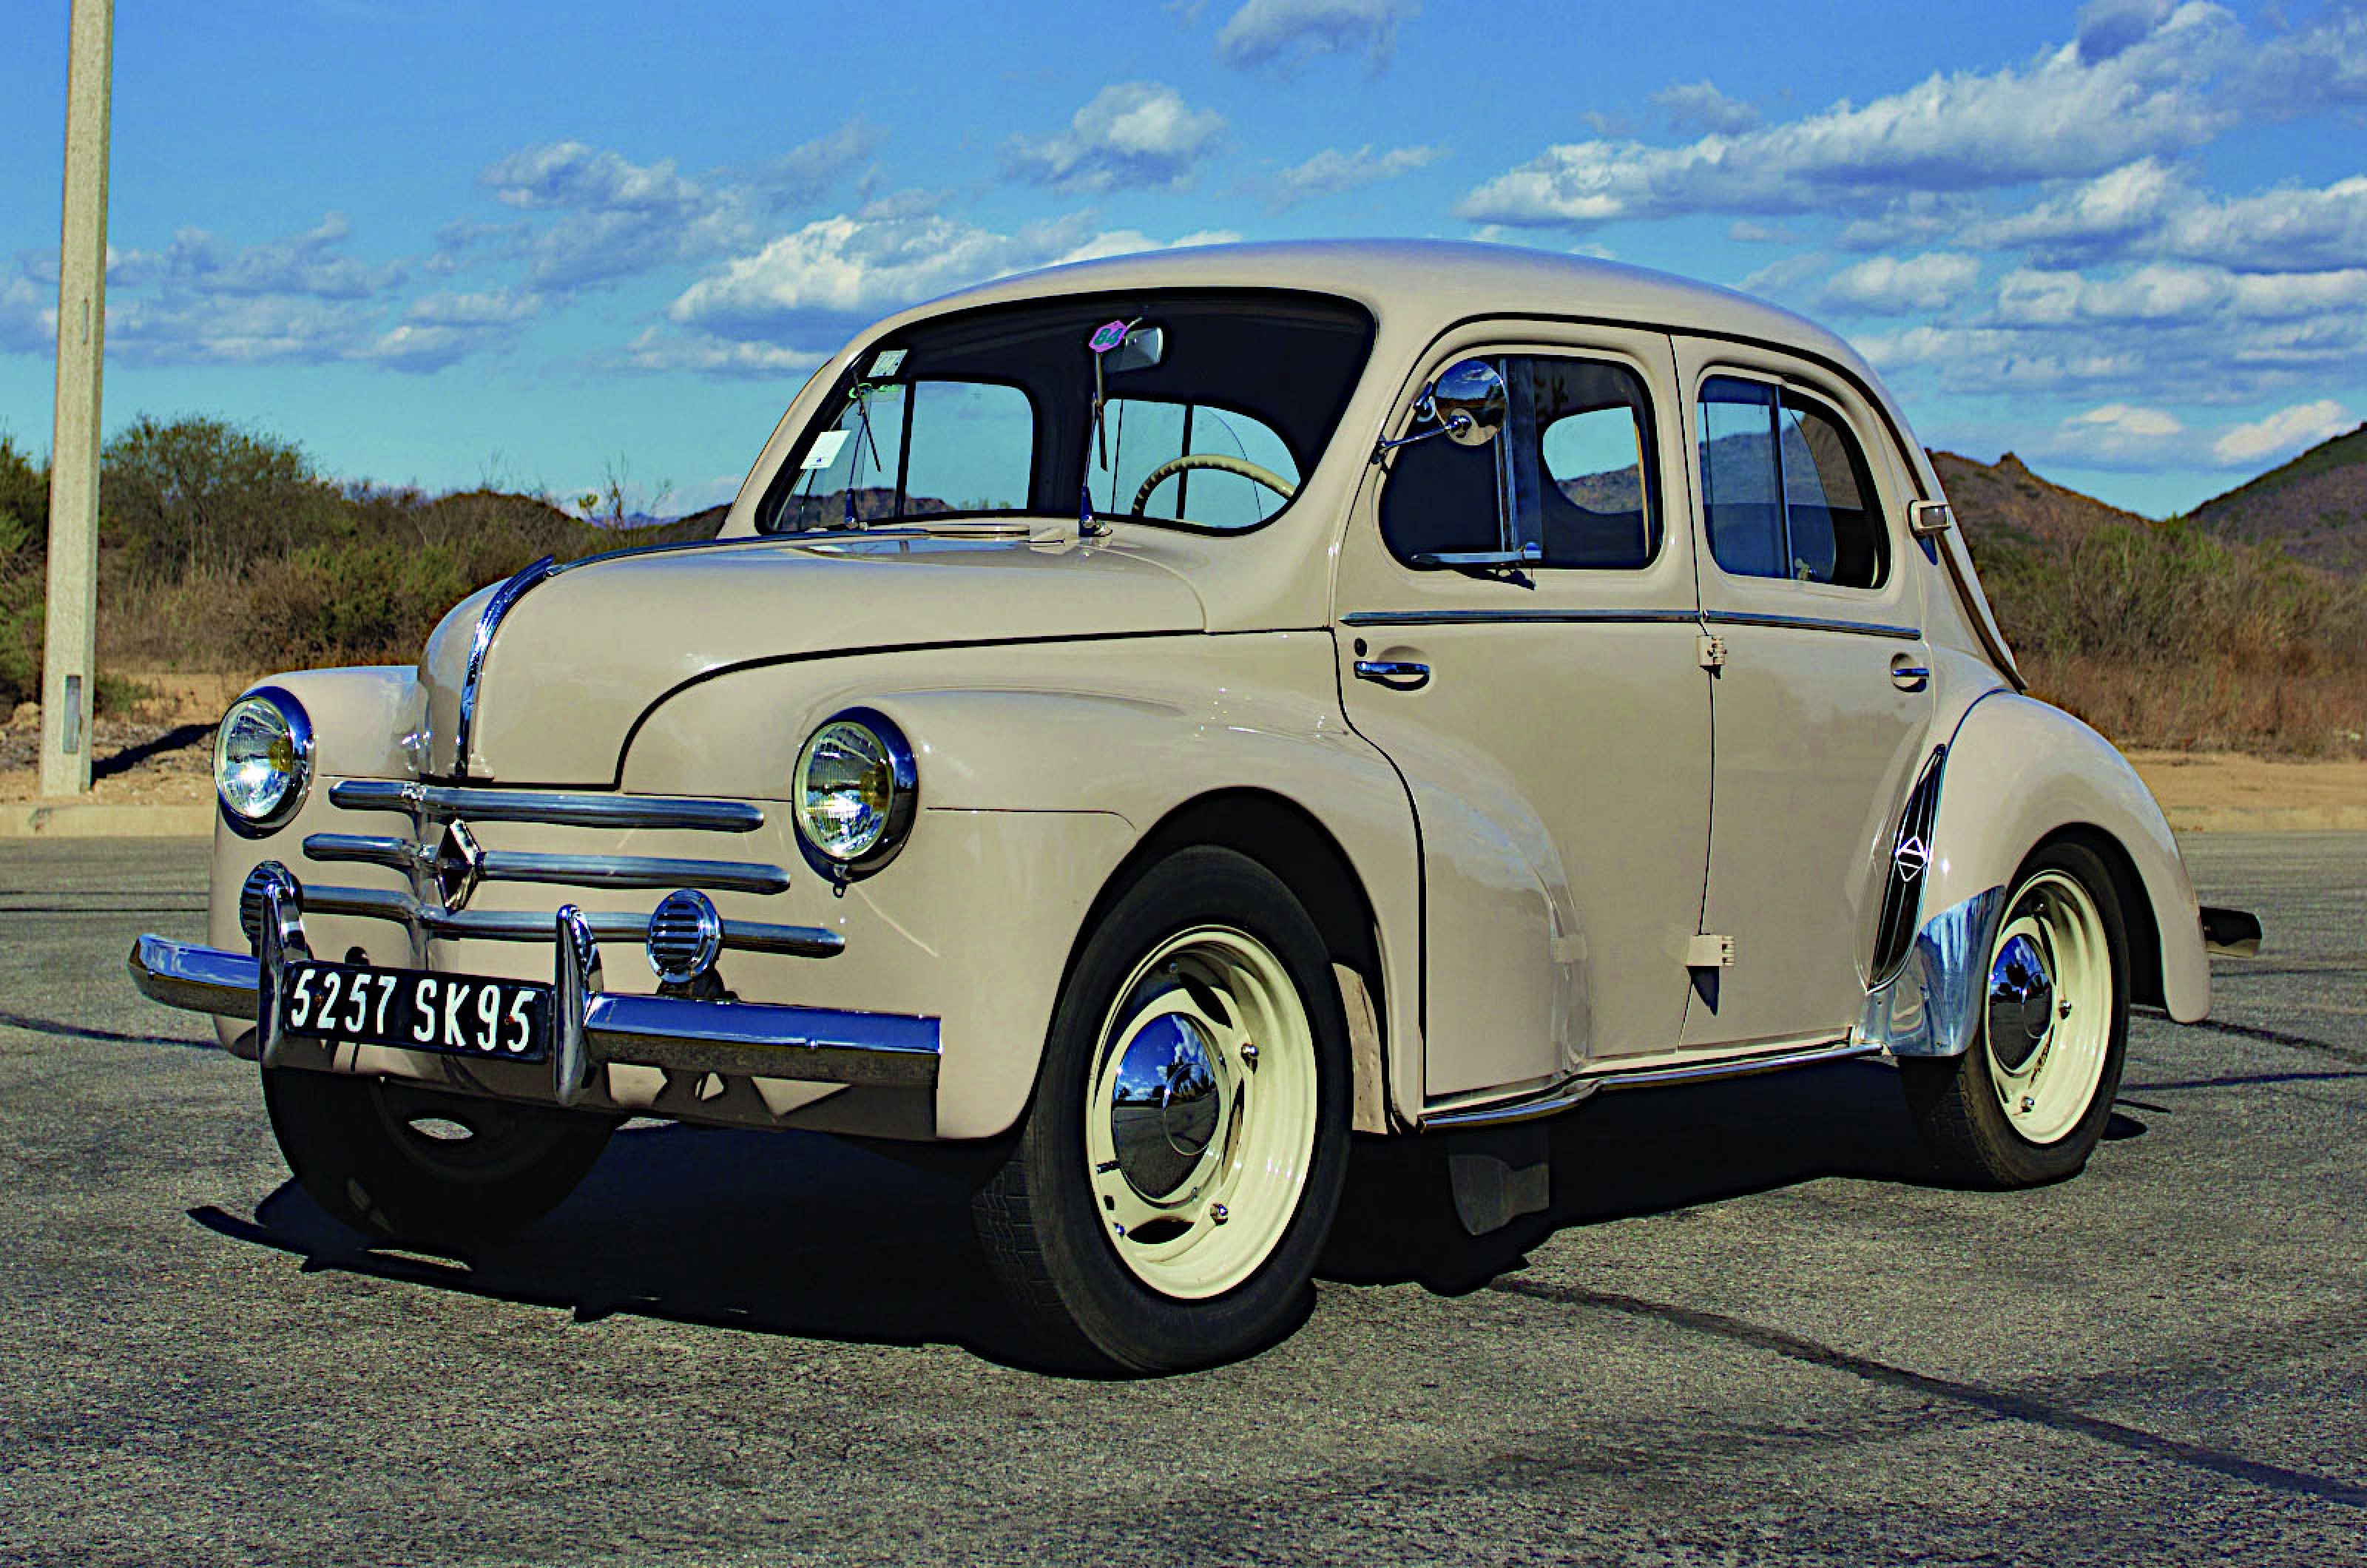 <p>In the early 1940s, all the Big Three US manufacturers were producing cars with high-domed hoods and very large, curved front fenders which housed the headlights.</p>  <p>From 1942, the shape of the Chevrolet Fleetline’s fenders extended beyond the items themselves and well into the front doors, a feature which, like the others mentioned, was taken up by several European auto makers after the Second World War.</p>  <p>Renault, not usually influenced by American styling, took all this on board with its first post-war model, the 4CV, sold in the UK initially as the 760 and later as the 750.</p>  <p>The original 4CV prototype, built in 1942, had absolutely none of the above, but it had all been added by the time production started five years later, along with non-functional horizontal metal strips which hinted (anachronistically, since the engine was mounted at the rear) at US-style chrome radiator grilles.</p>